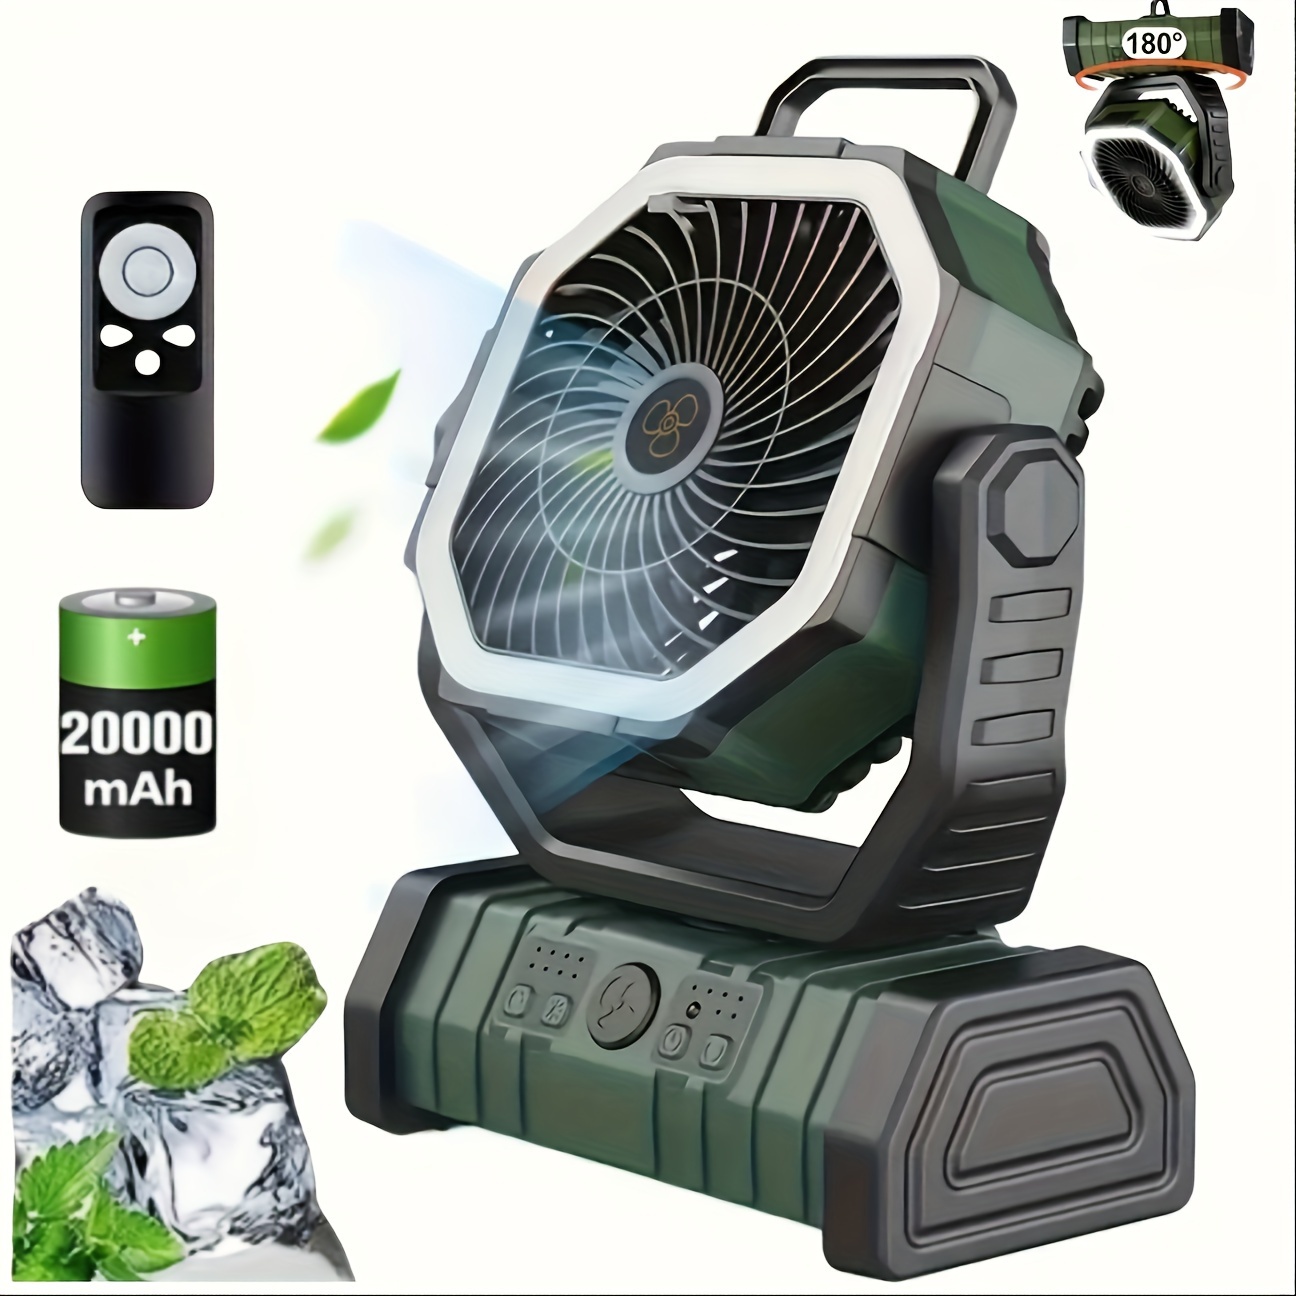 

Portable Camping Fan With Led Lights, Outdoor Tent Fan, Usb Charging, High Power Fan For Camping, Home Use